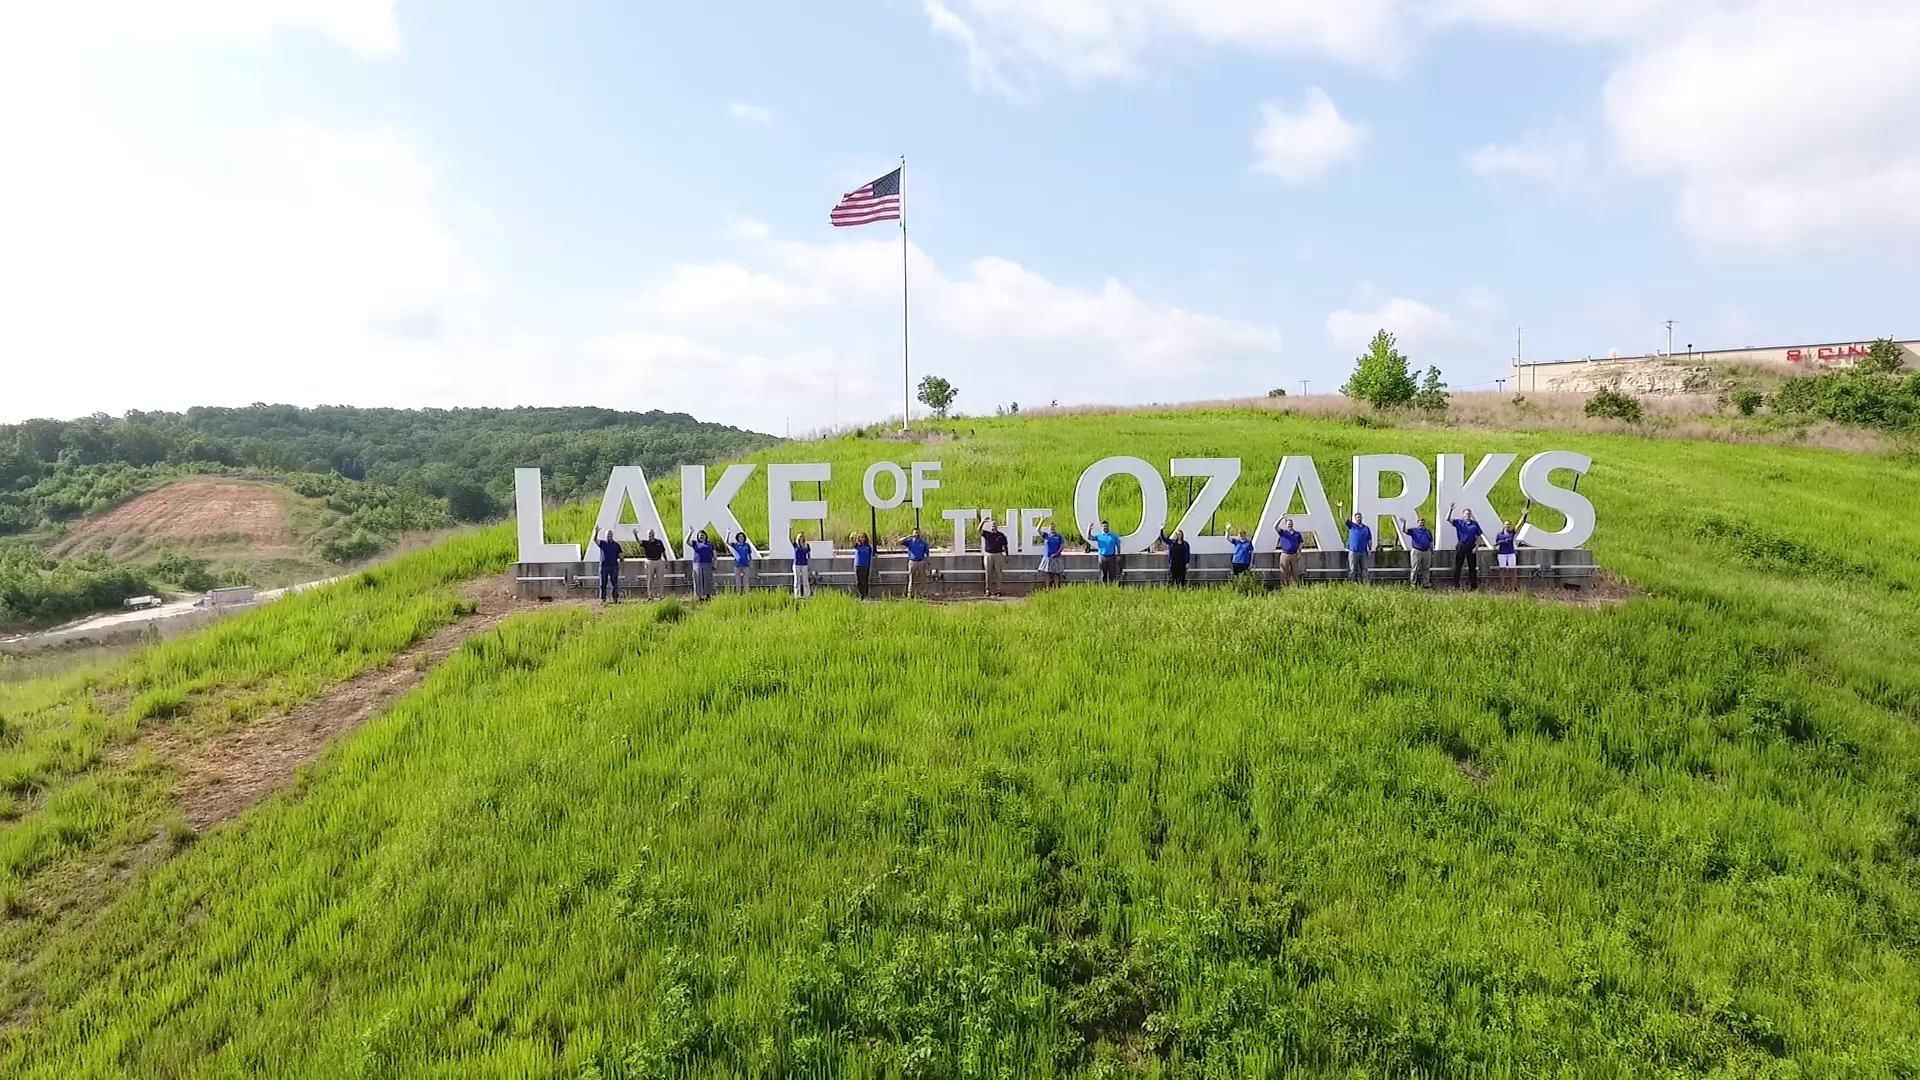 Lake of the Ozarks iconic sign, Hollywood-inspired, Boating adventures, Memorable milestones, 1920x1080 Full HD Desktop